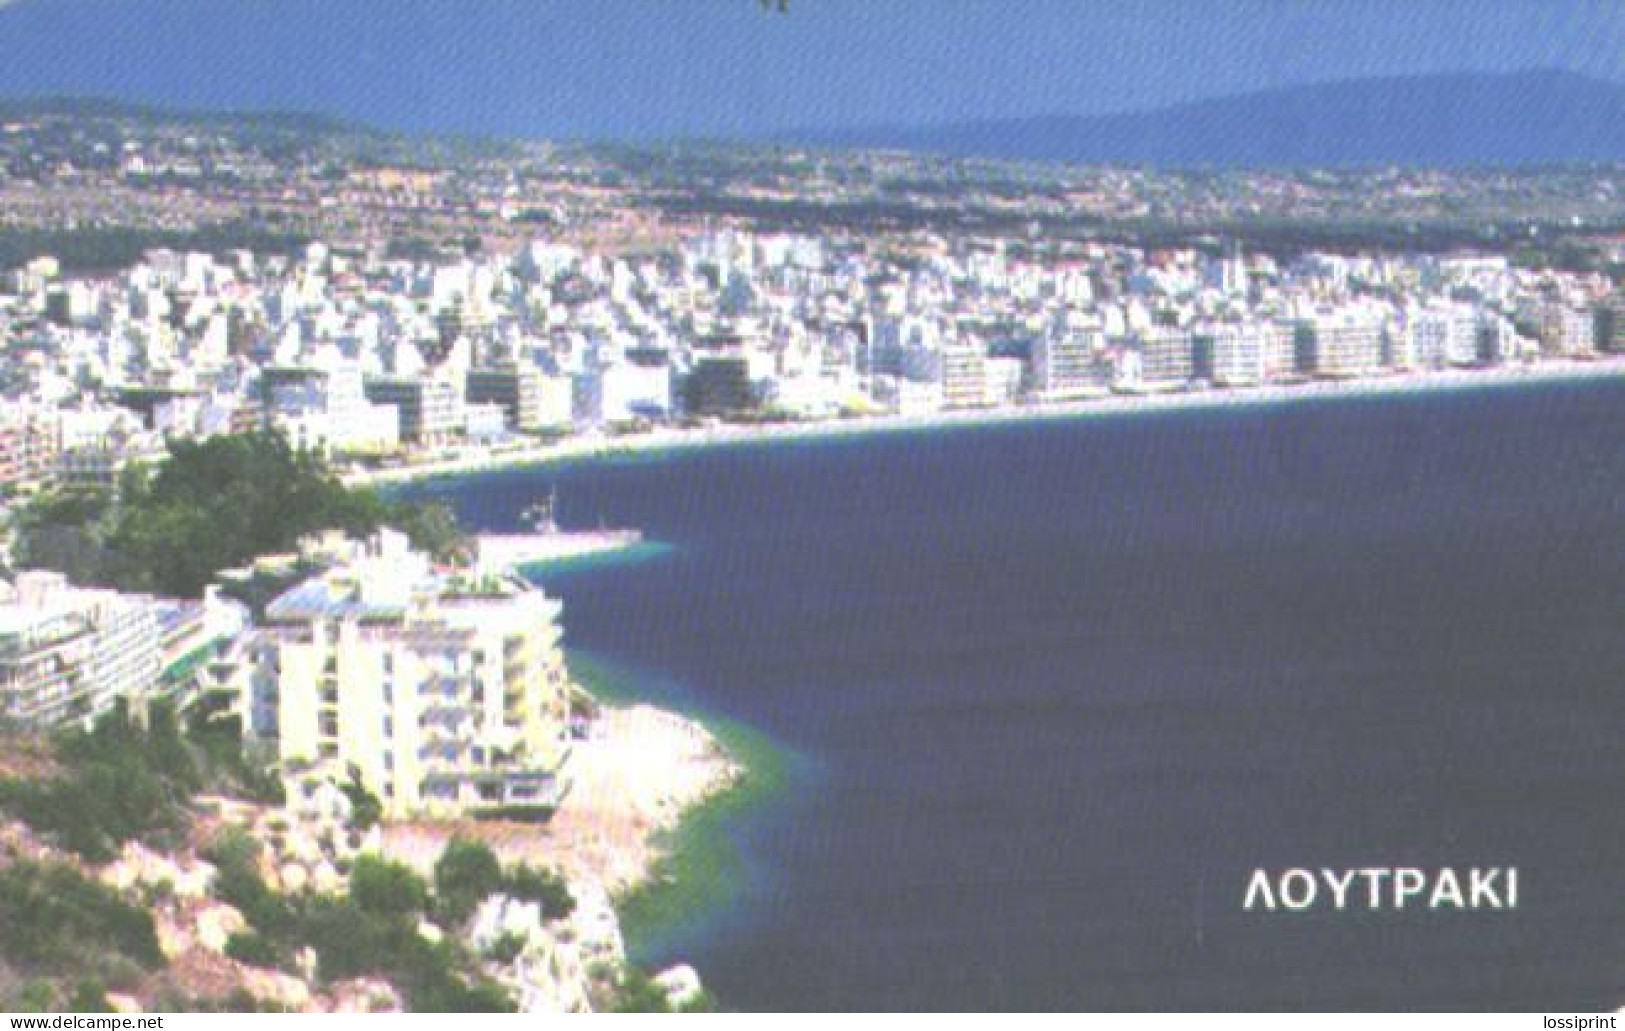 Greece:Used Phonecard, OTE, 100 Units, Hpaioy Lighthouse, Loytpaki Aerial View, 1996 - Faros